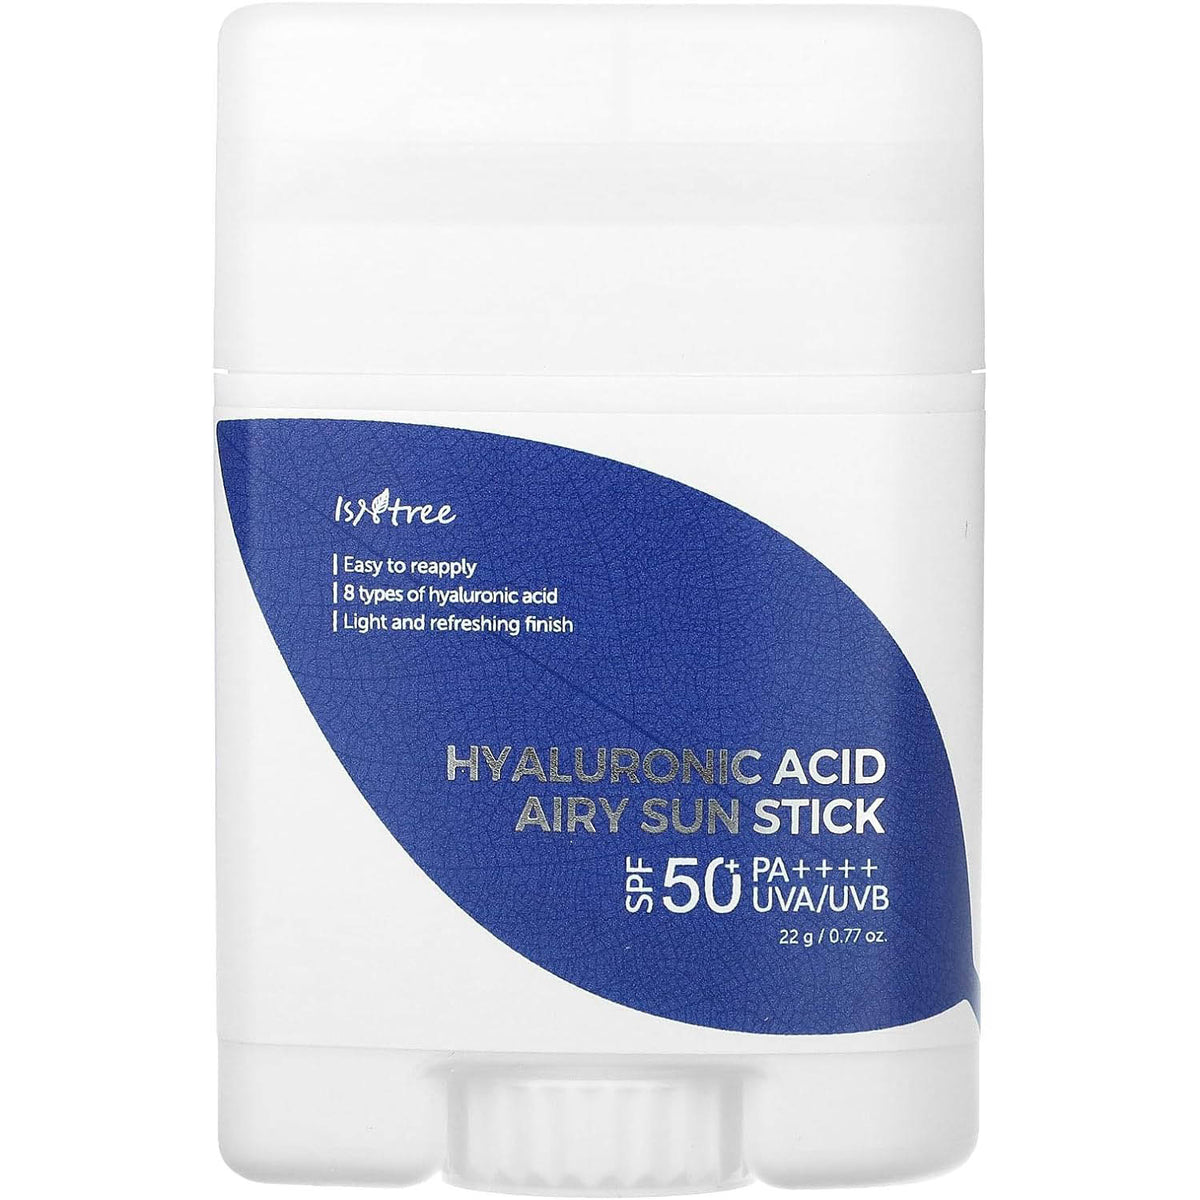 Hyaluronic Acid Airy Sun Stick Isntree